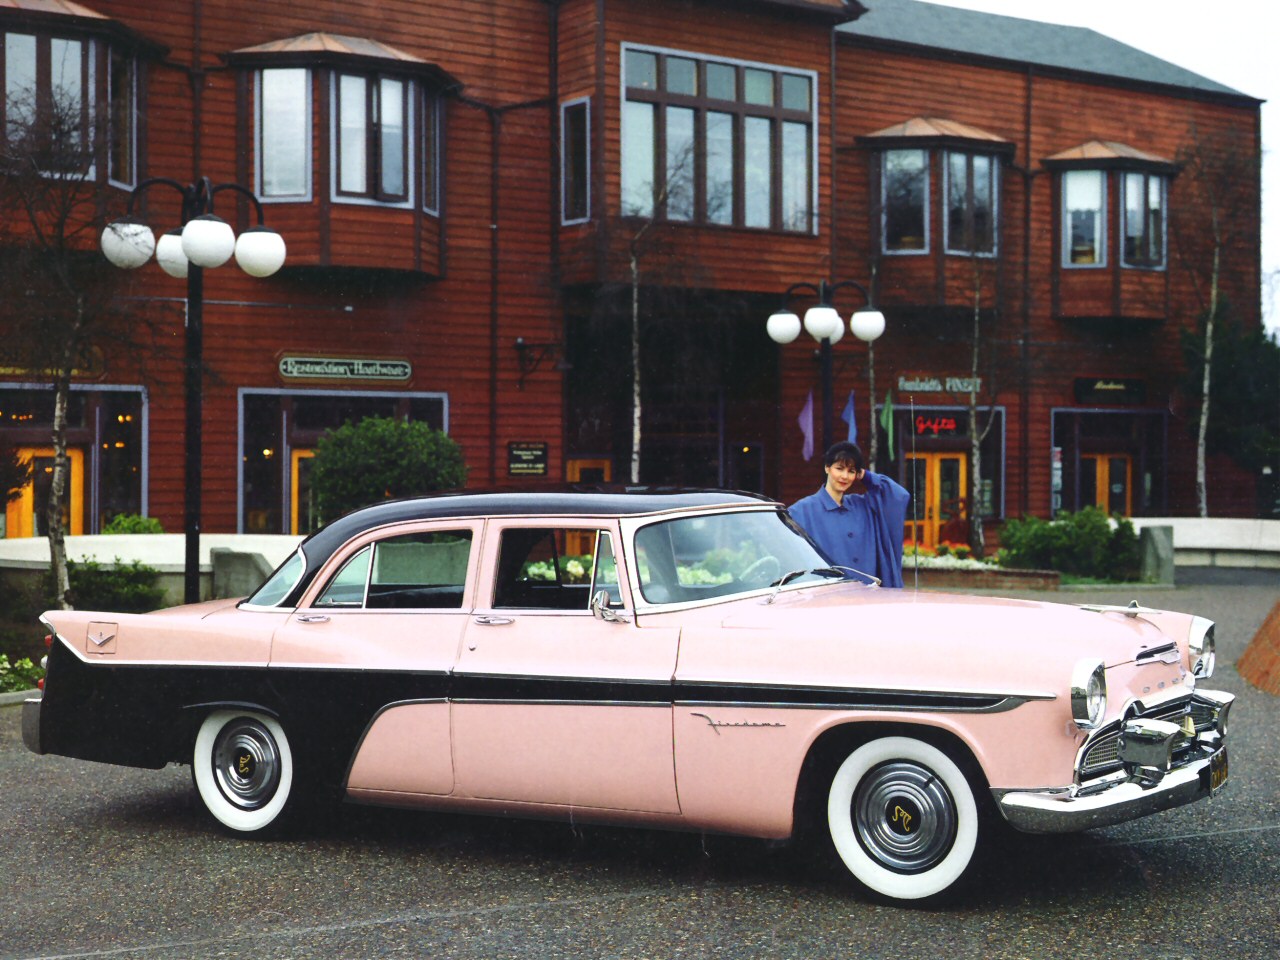 De Soto AS 250 Photo Gallery: Photo #01 out of 11, Image Size ...